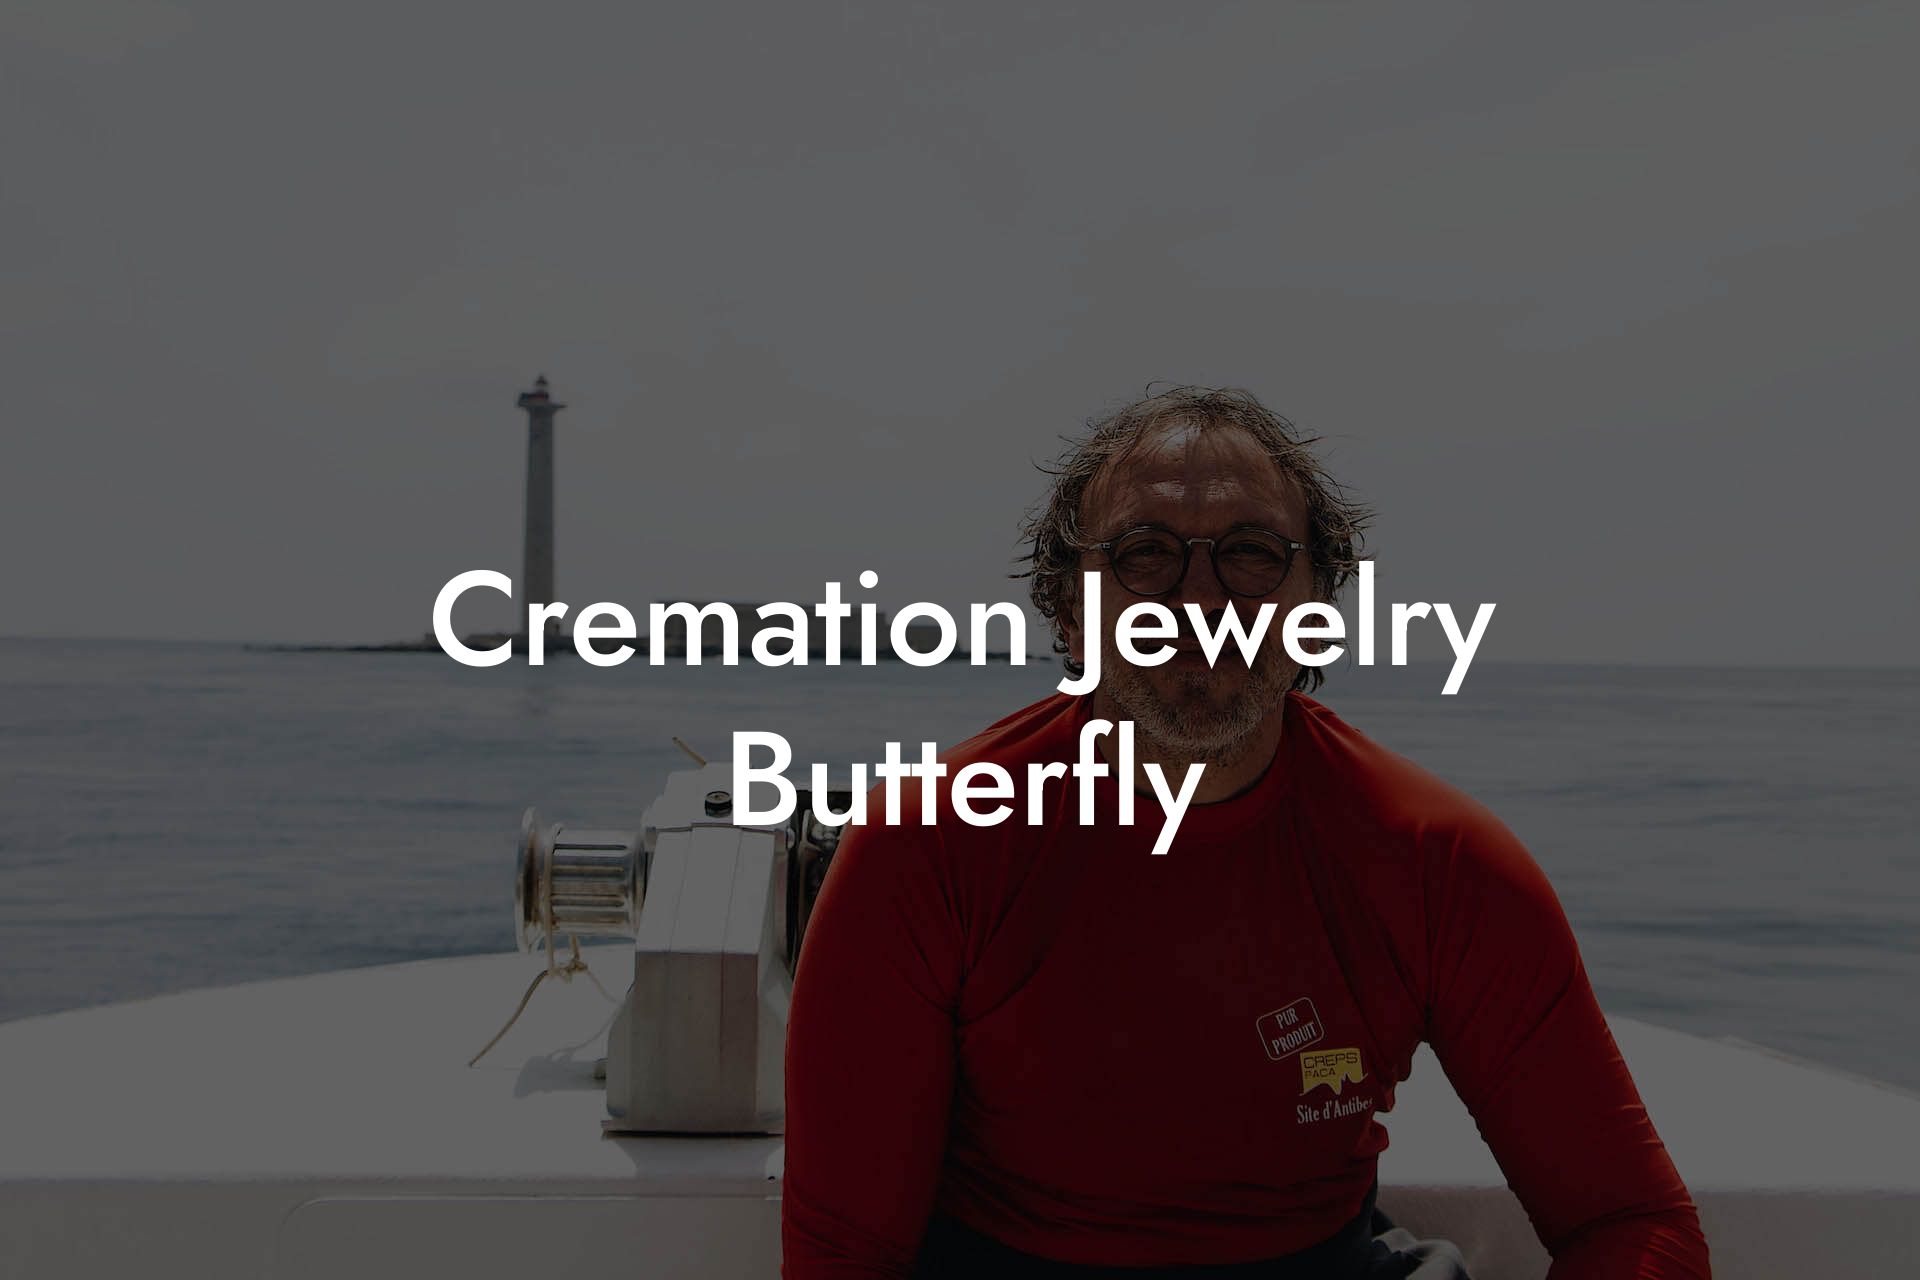 Cremation Jewelry Butterfly